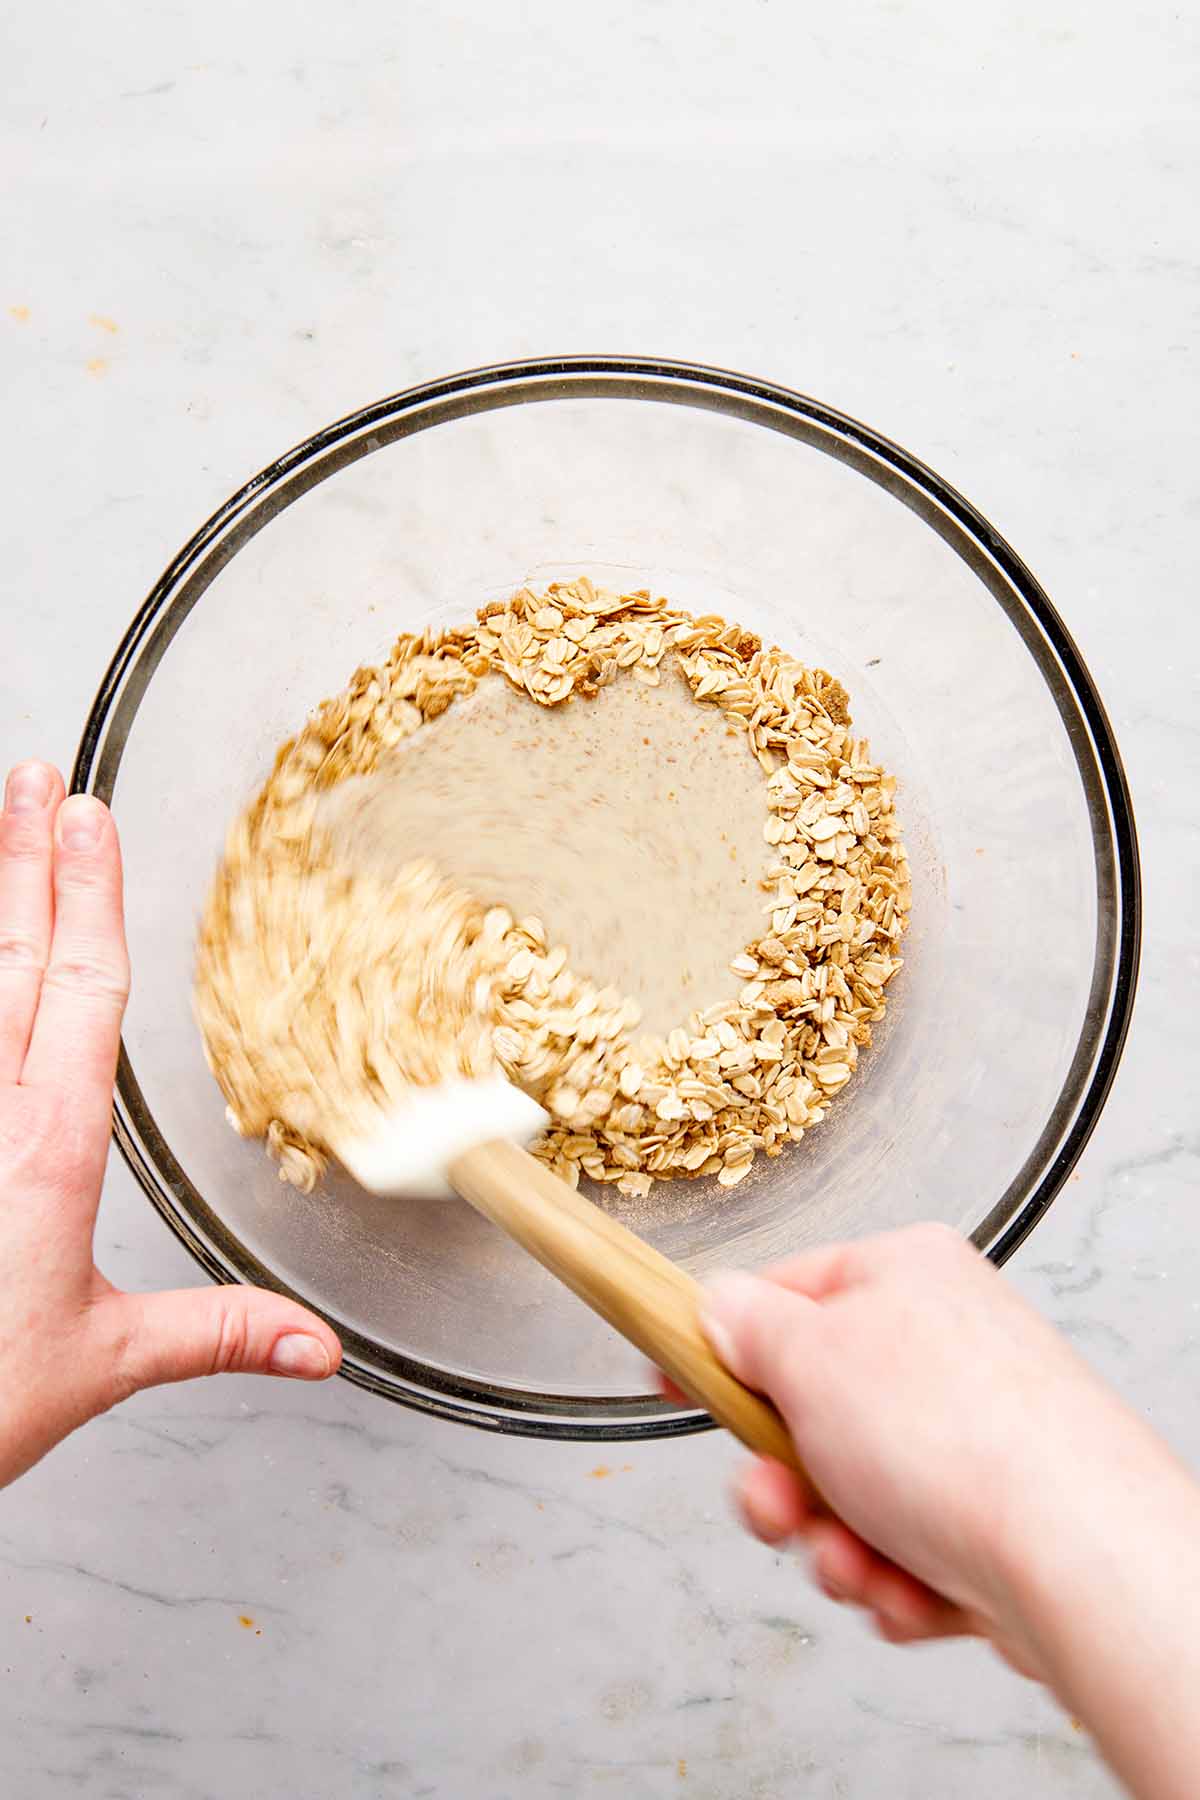 A hand using a rubber spatula to stir wet and dry ingredients in a bowl.